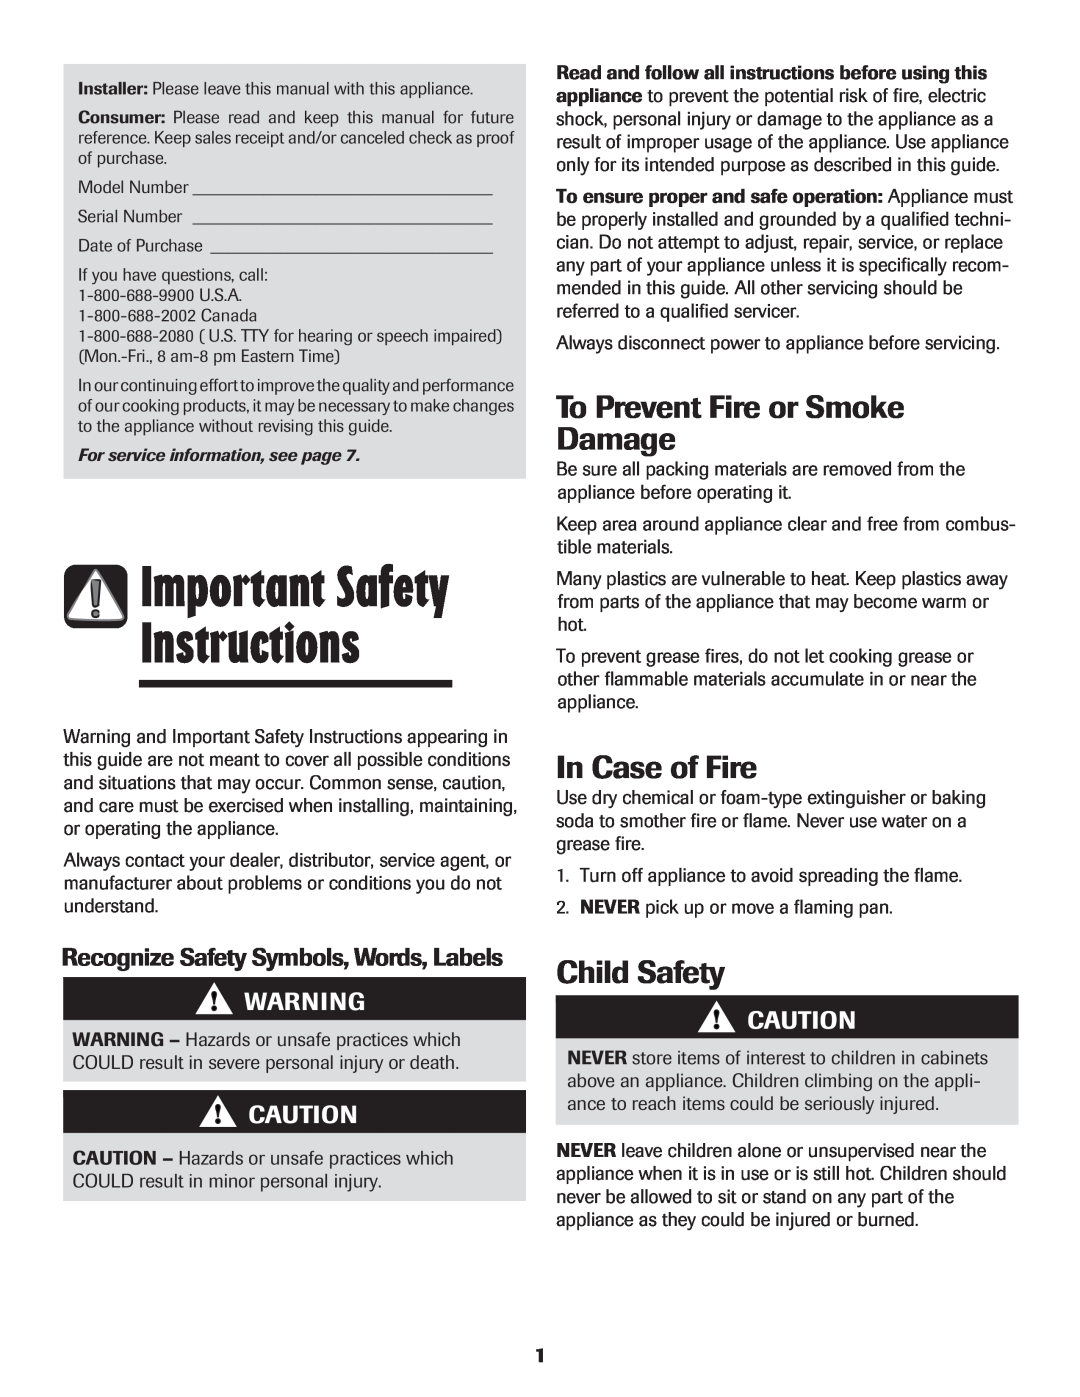 Maytag MEC4436AAW Instructions, Important Safety, To Prevent Fire or Smoke Damage, In Case of Fire, Child Safety 